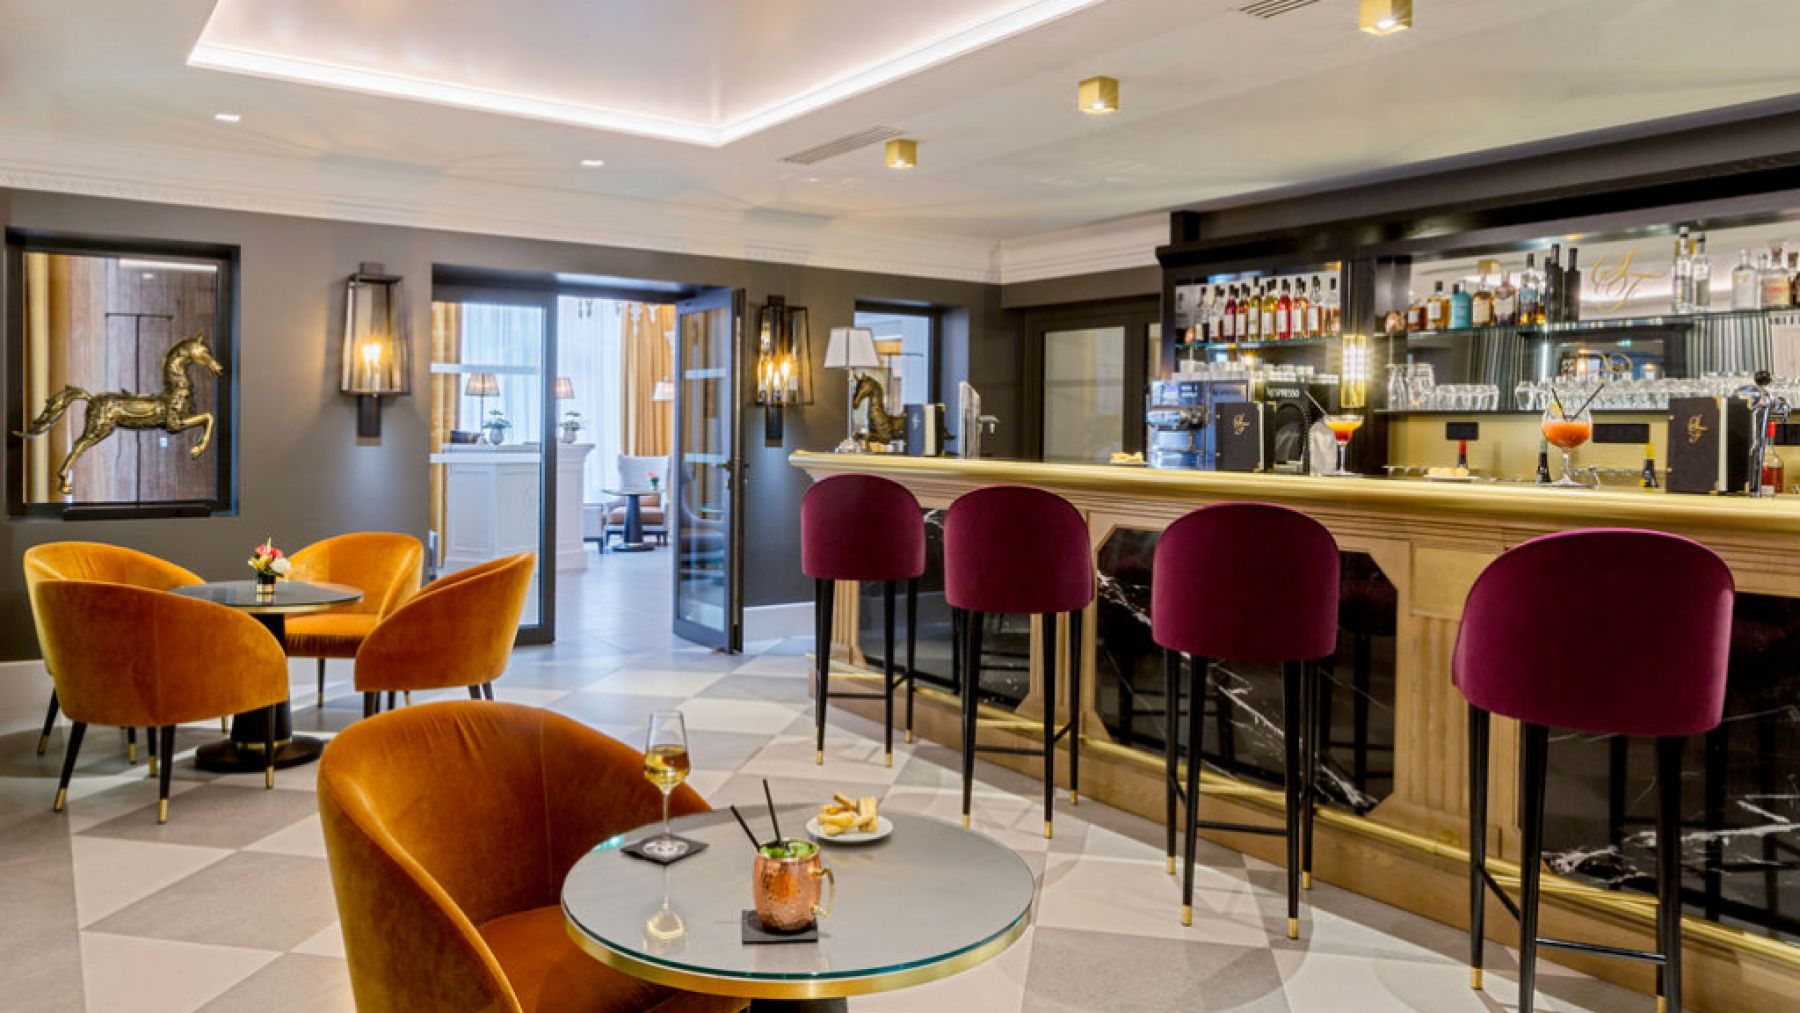 Opt for a cosy afterwork at the Hotel Les Sept Fontaines's bar